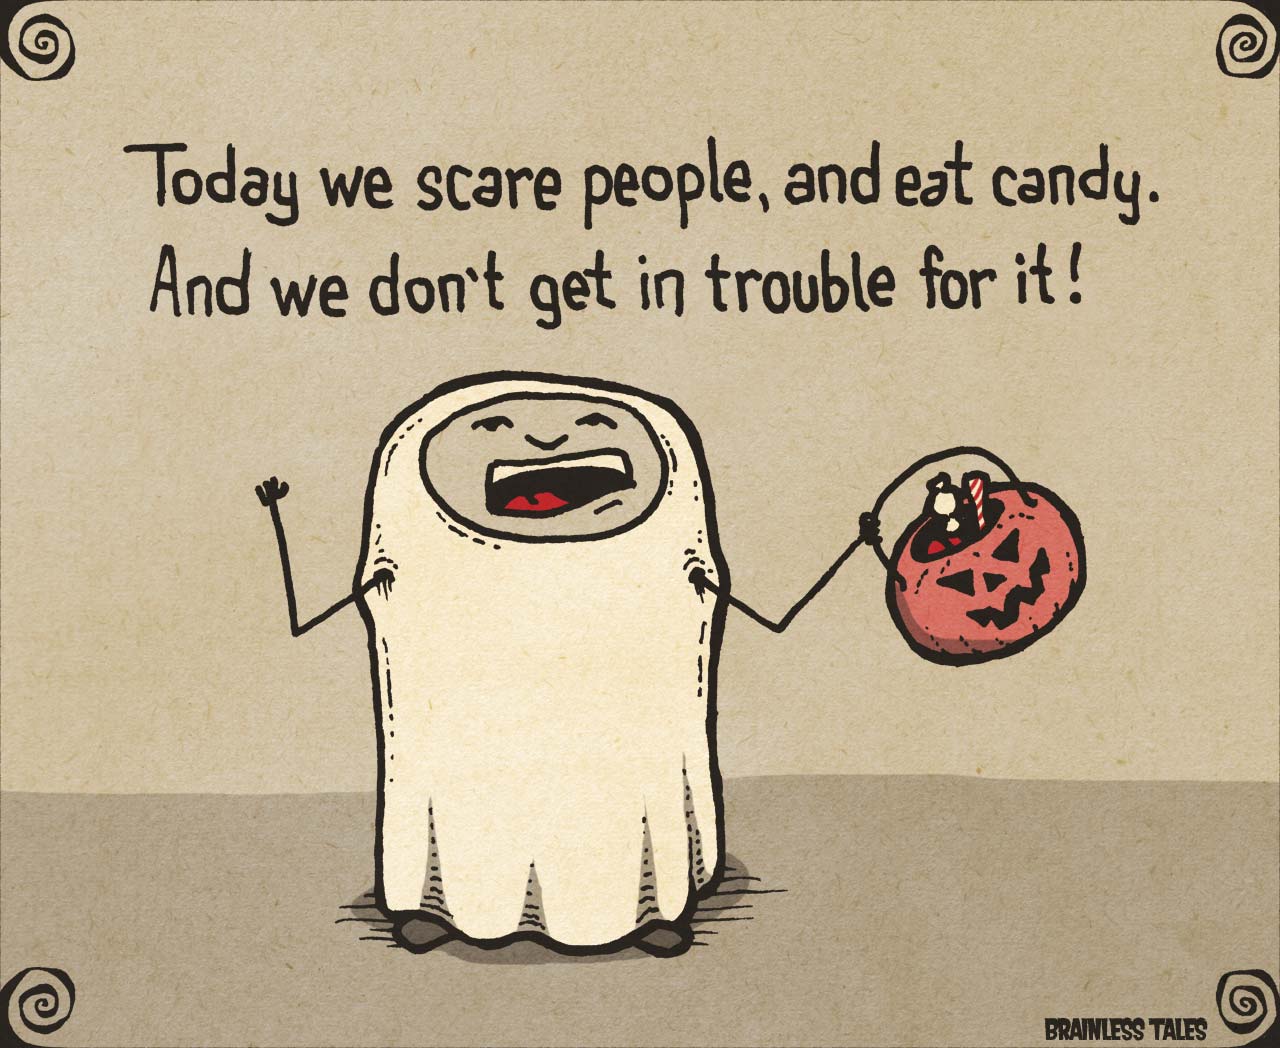 Scare People, and Eat Candy